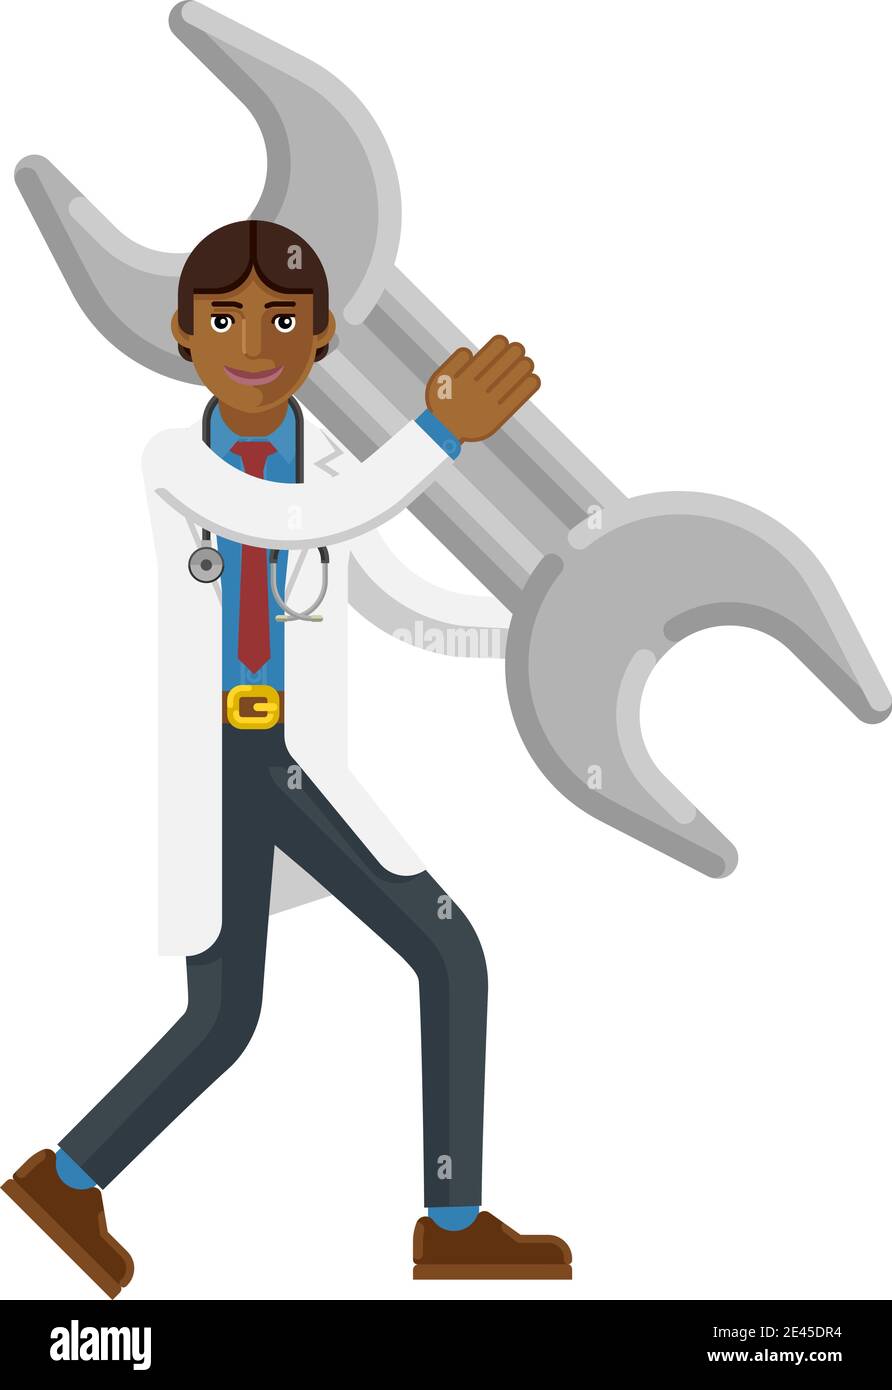 Asian Doctor Man Holding Spanner Wrench Mascot Stock Vector